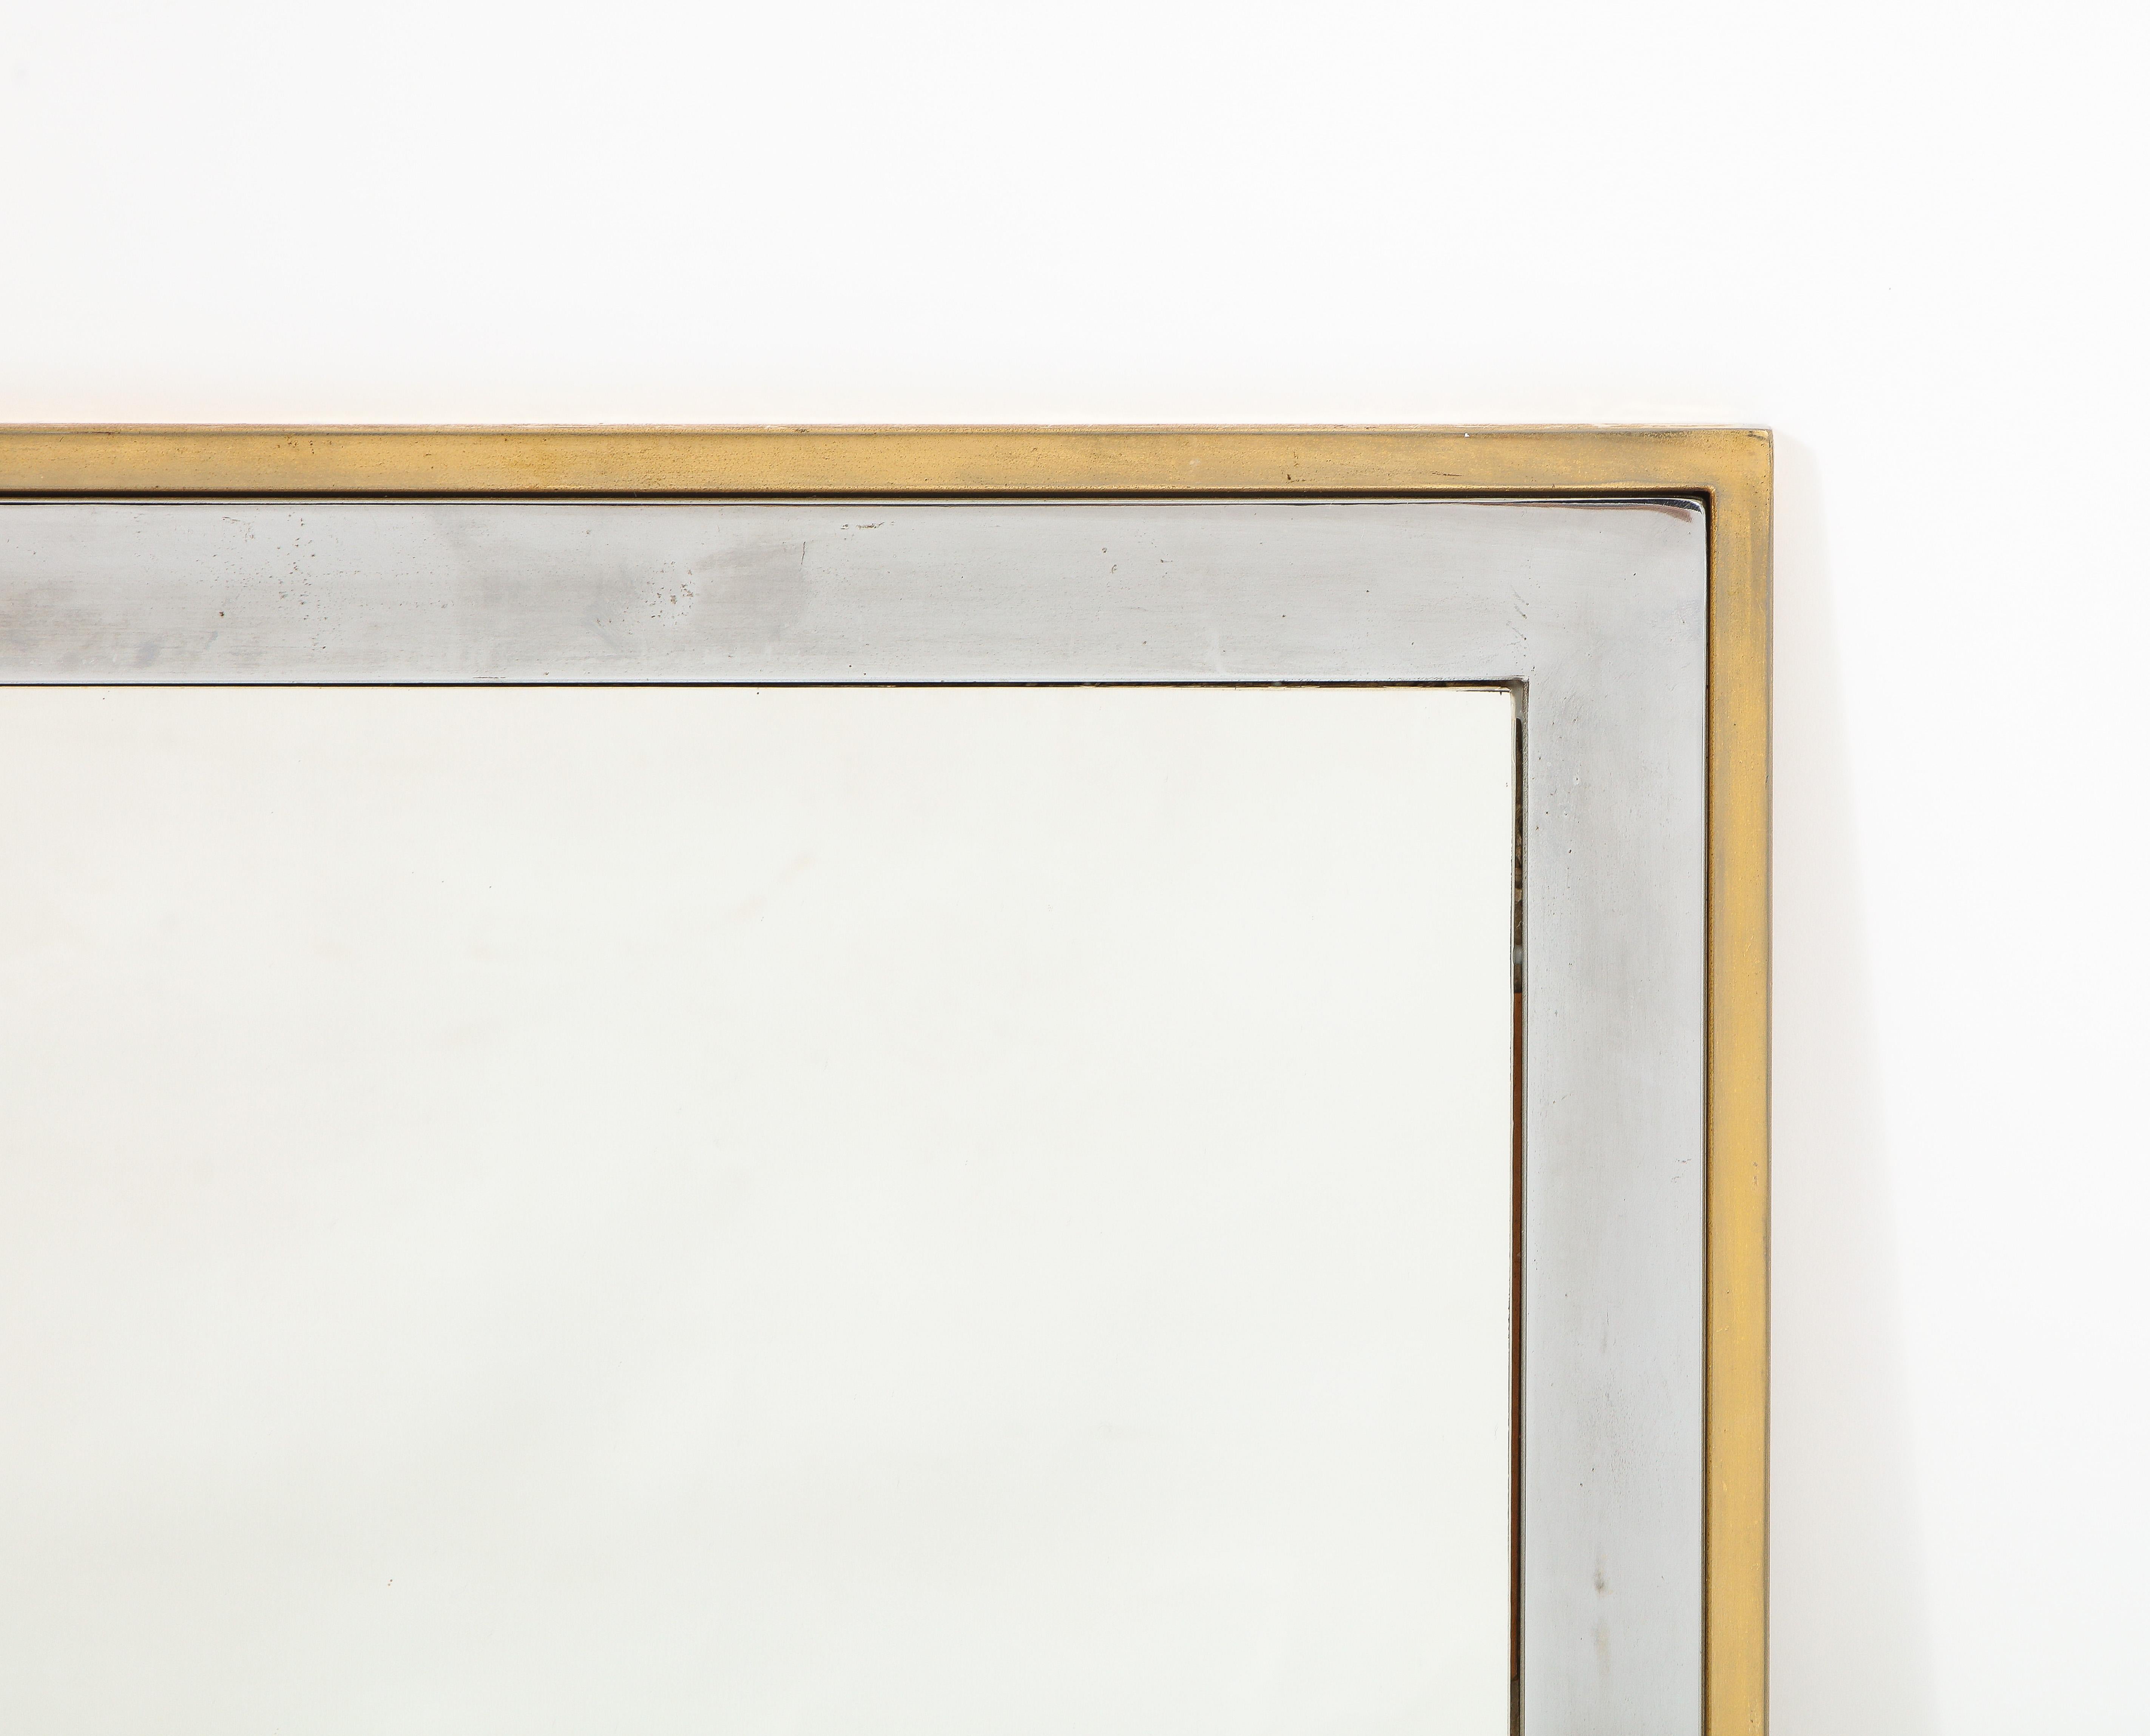 Nickel and Brass Rectangular Mixed Metal Mirror, France 1960's For Sale 1